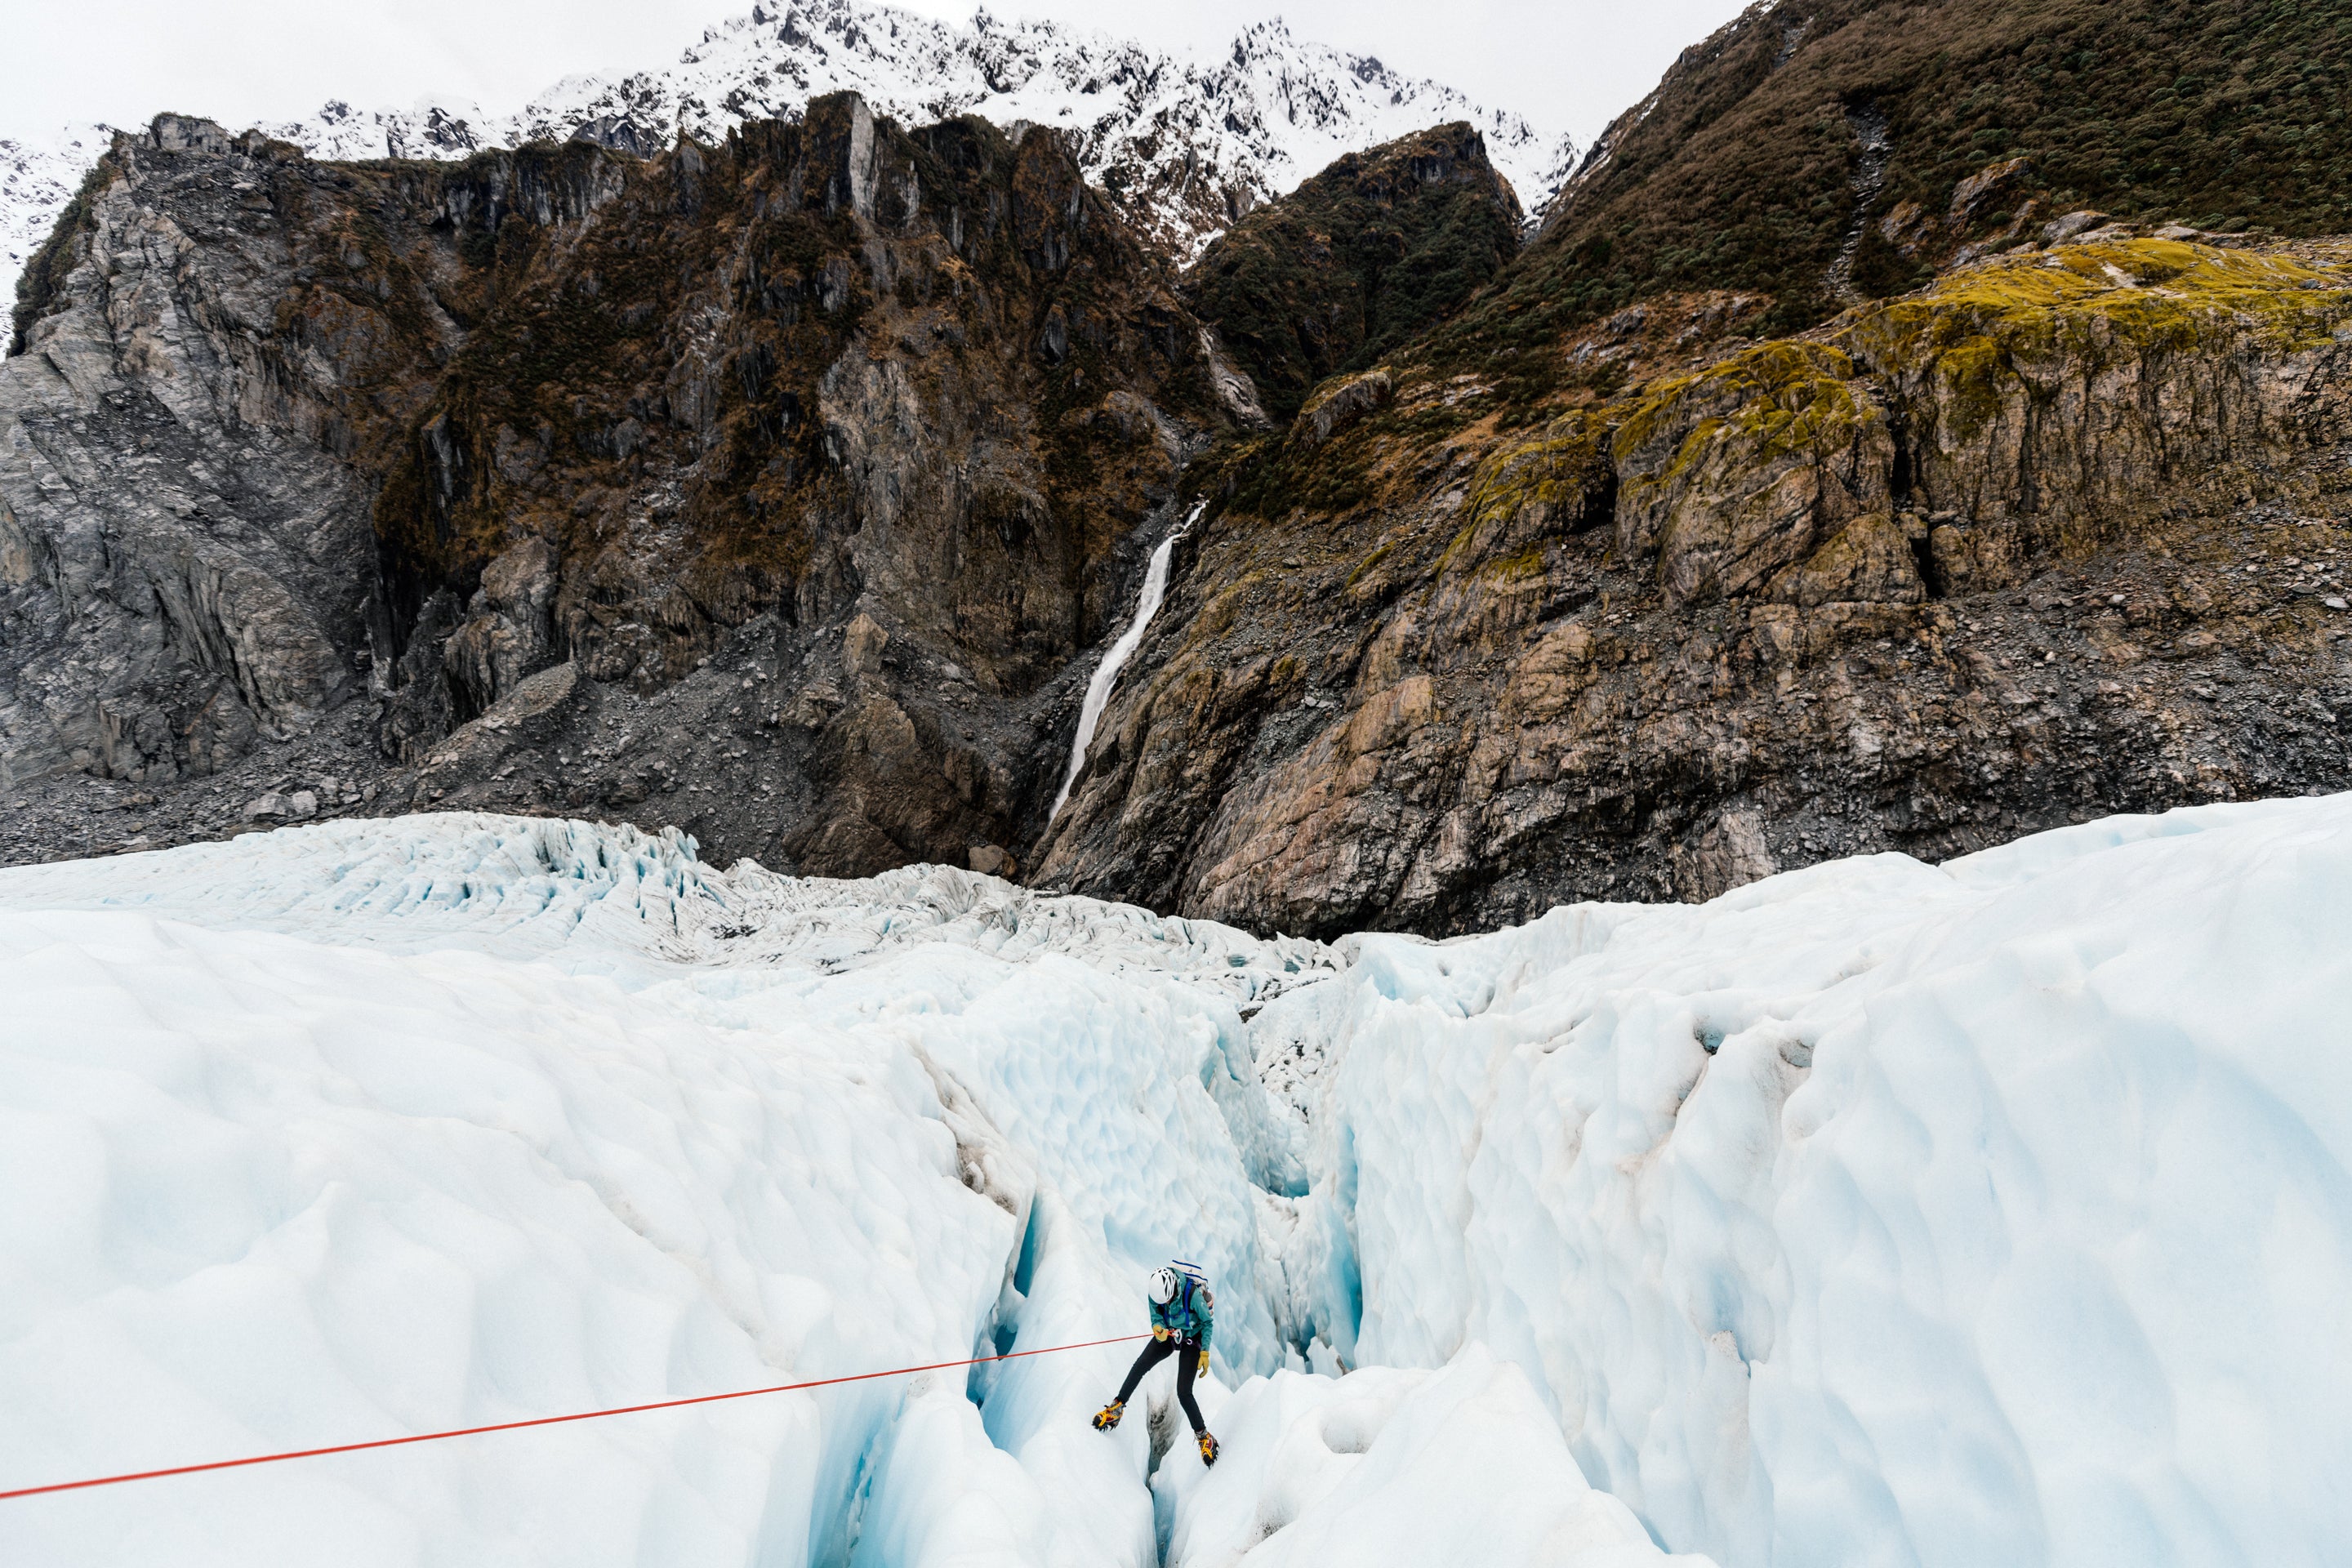 Lowering into ice